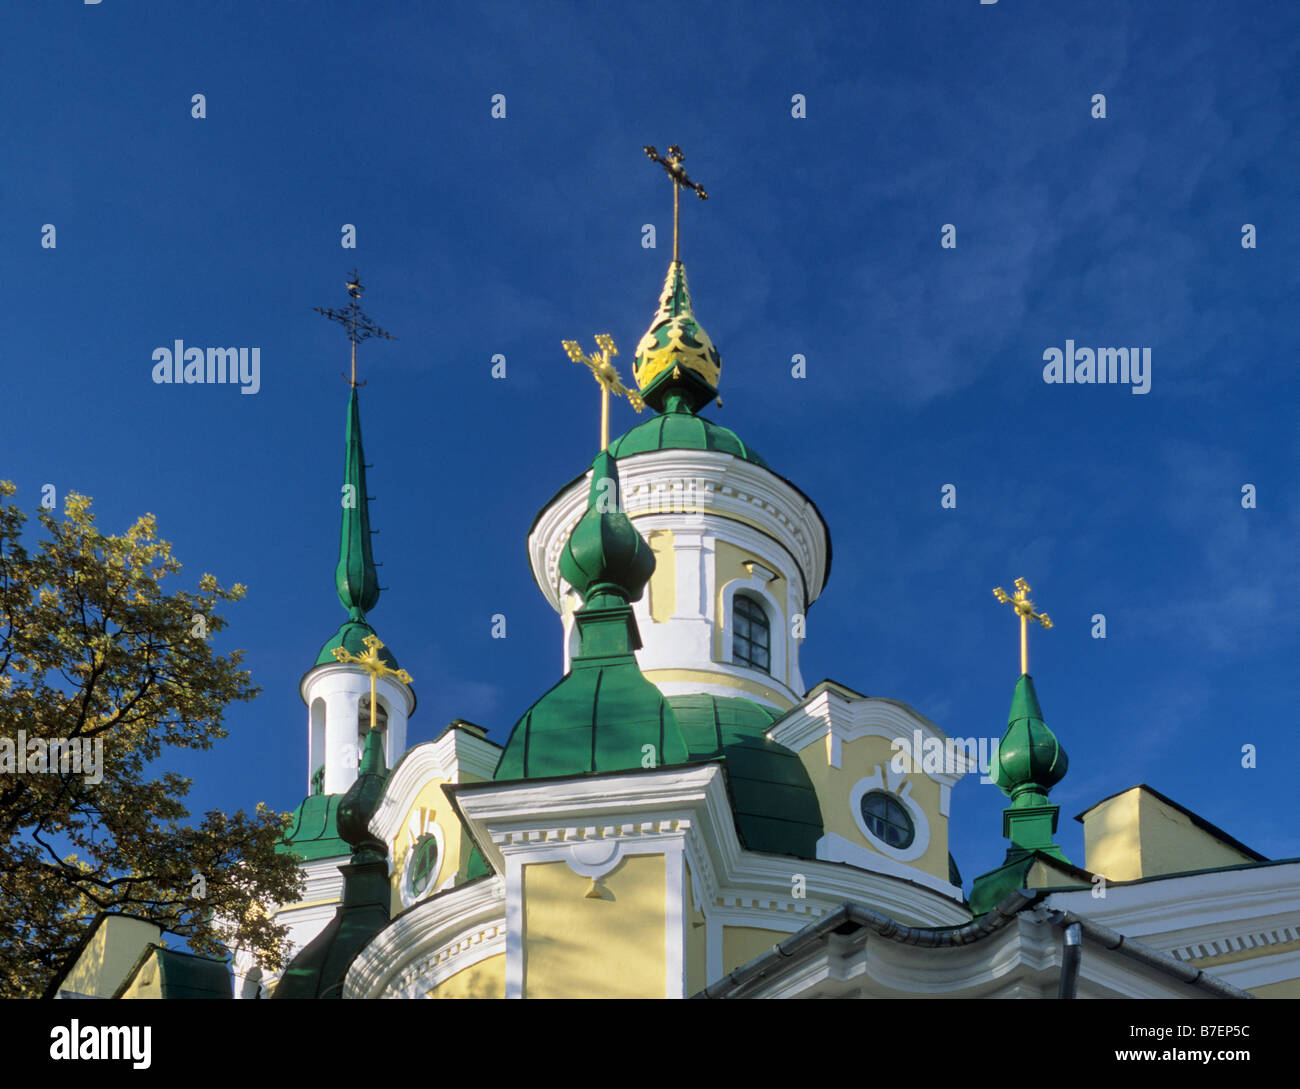 Domes and pinnacles at St Catherine Church in Parnu Estonia Stock Photo